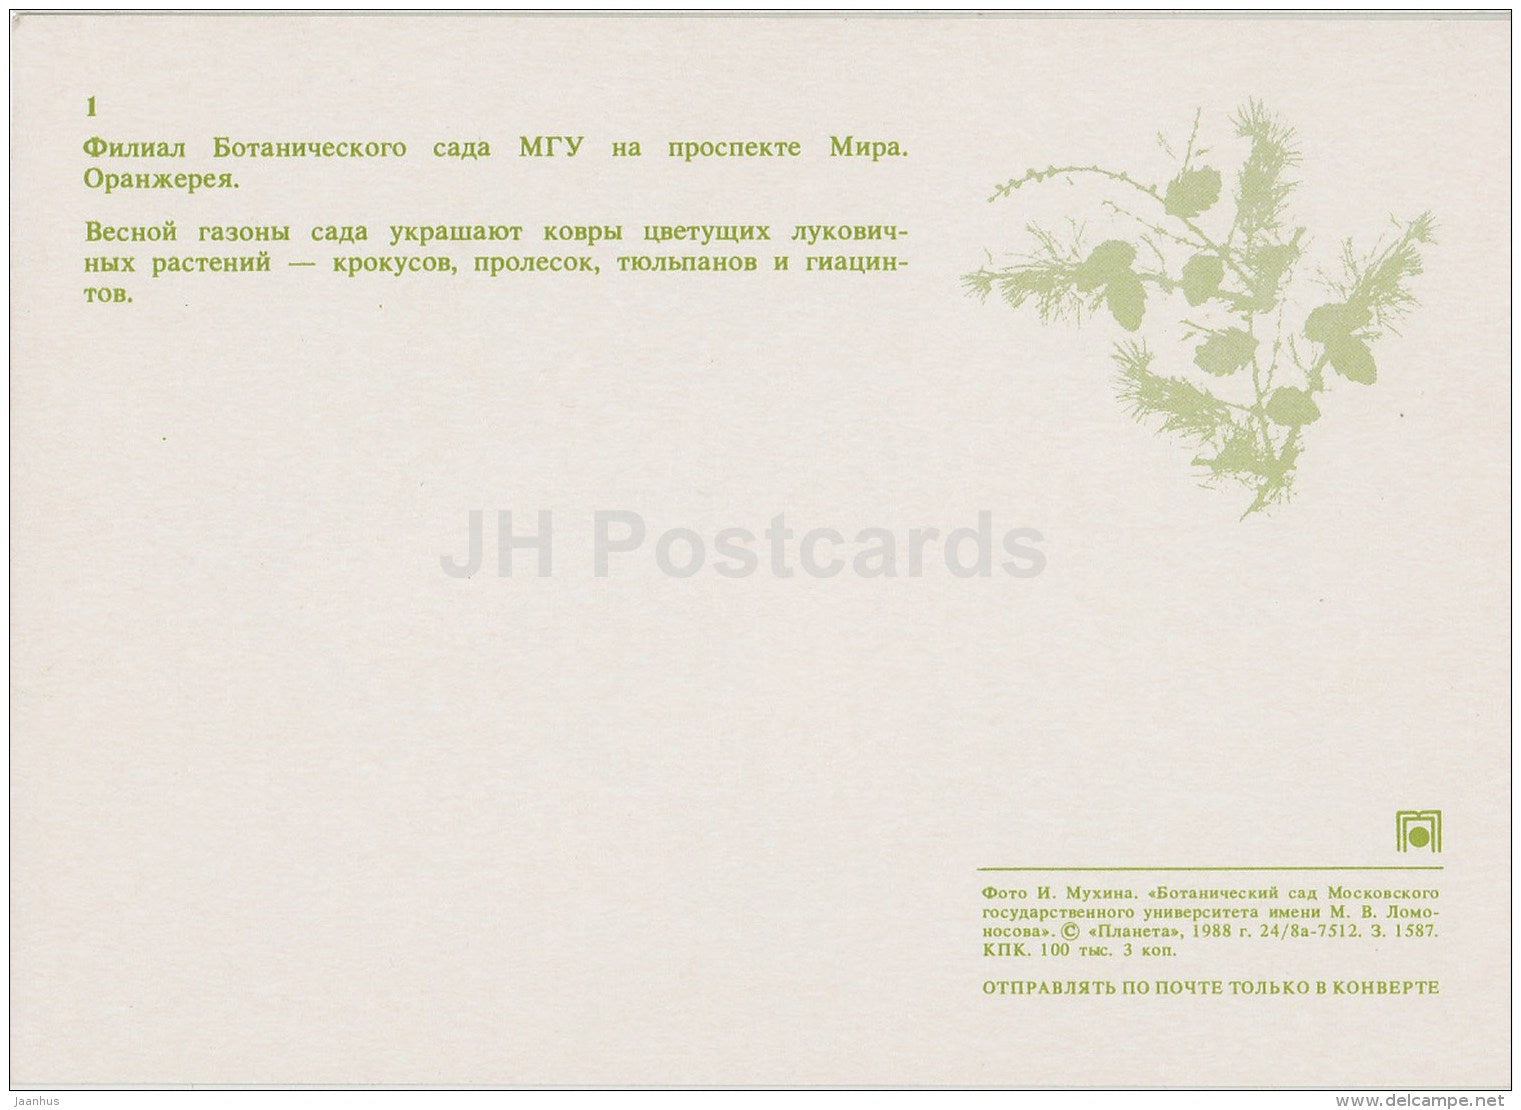 Branch of Botanical Garden of Moscow State University - Moscow Botanical Garden - 1988 - Russia USSR - unused - JH Postcards